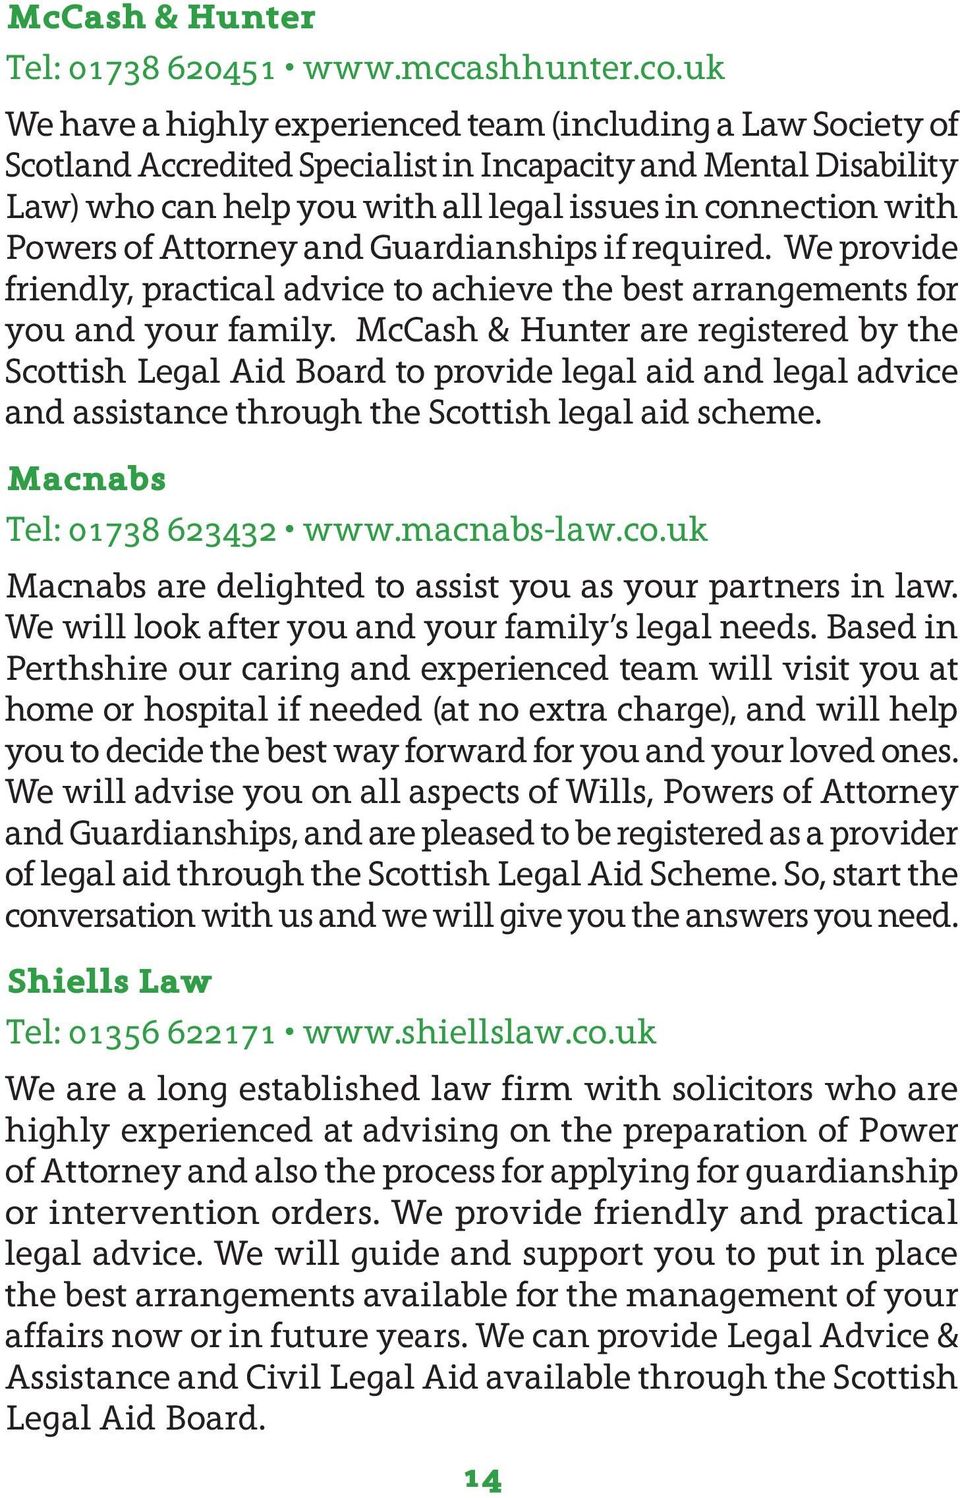 Powers of Attorney and Guardianships if required. We provide friendly, practical advice to achieve the best arrangements for you and your family.